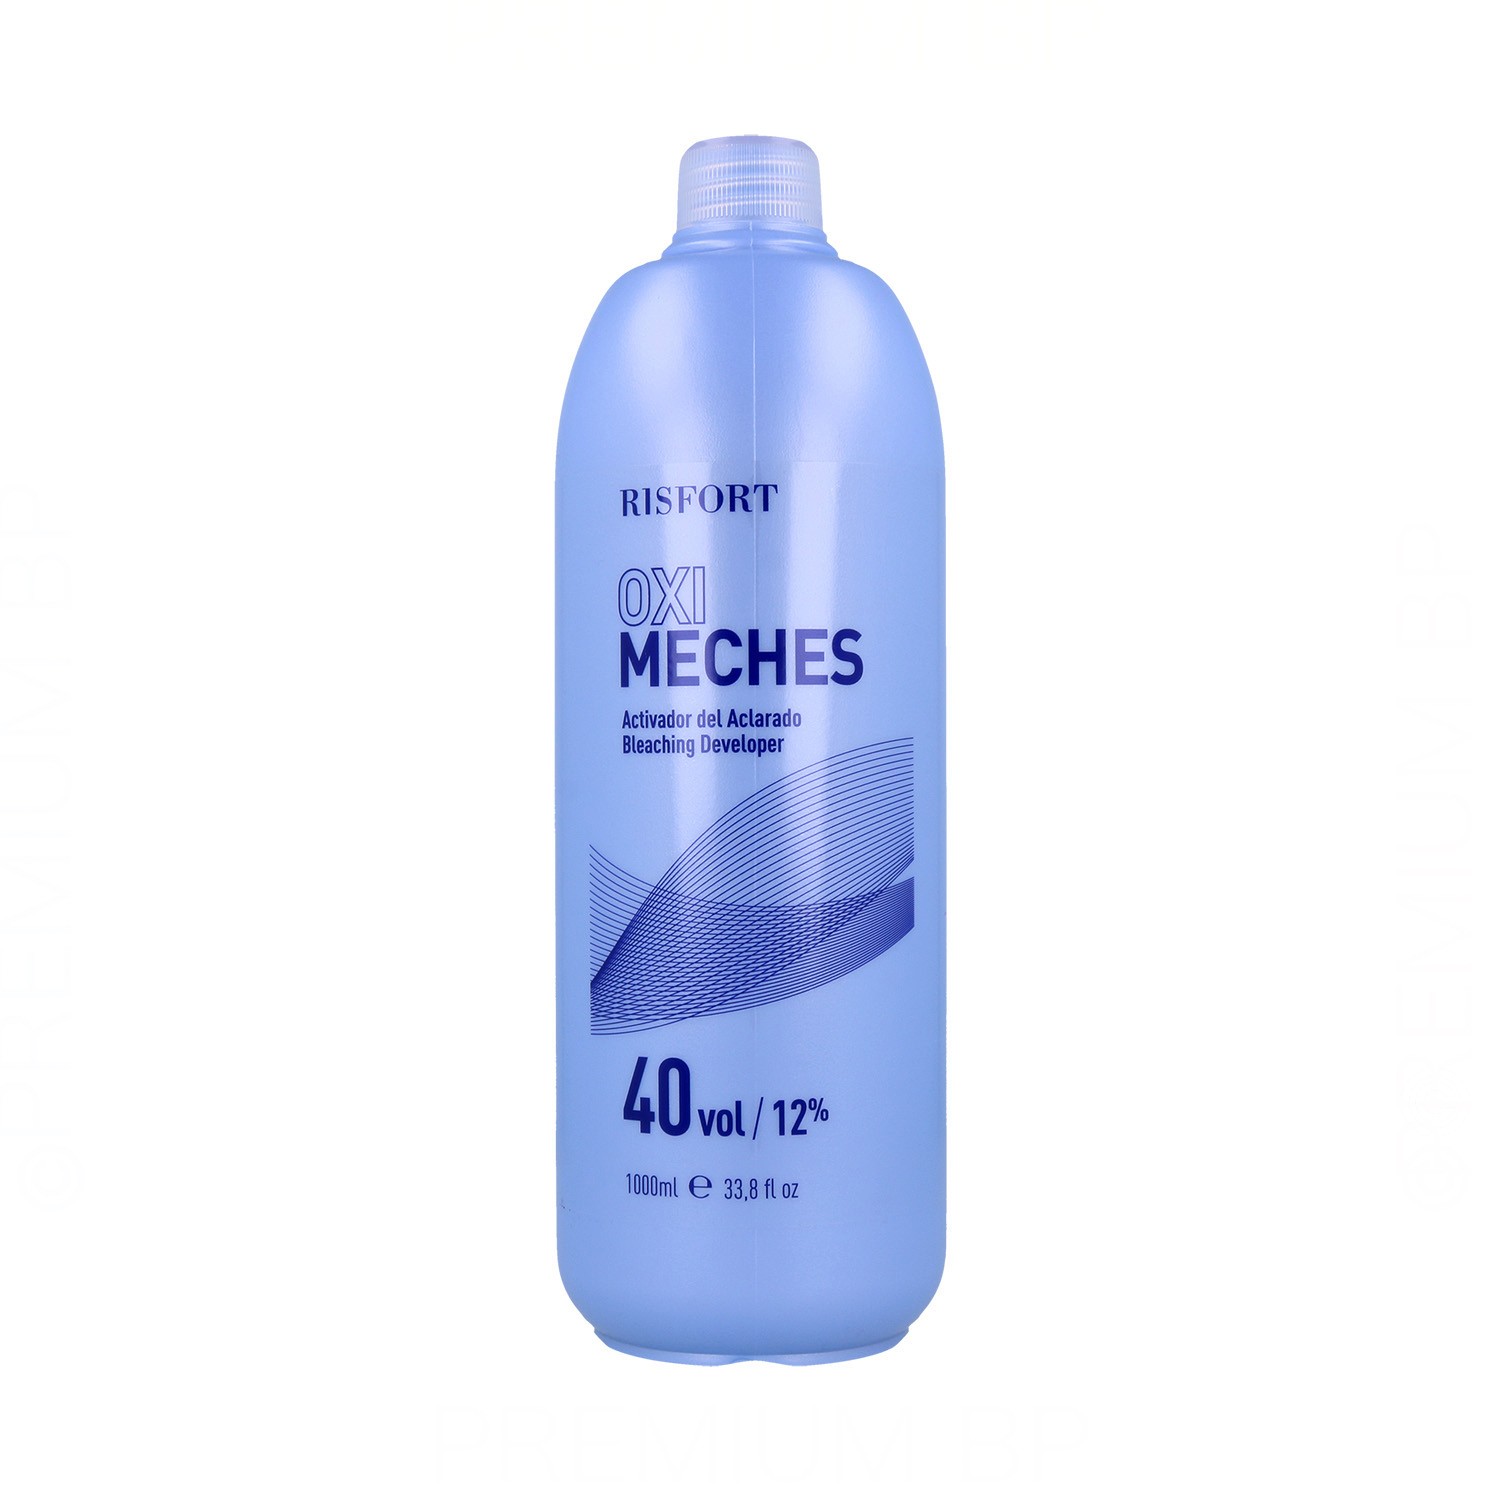 Risfort Oxydant Meches Act 40Vol (12%) 1000 ml